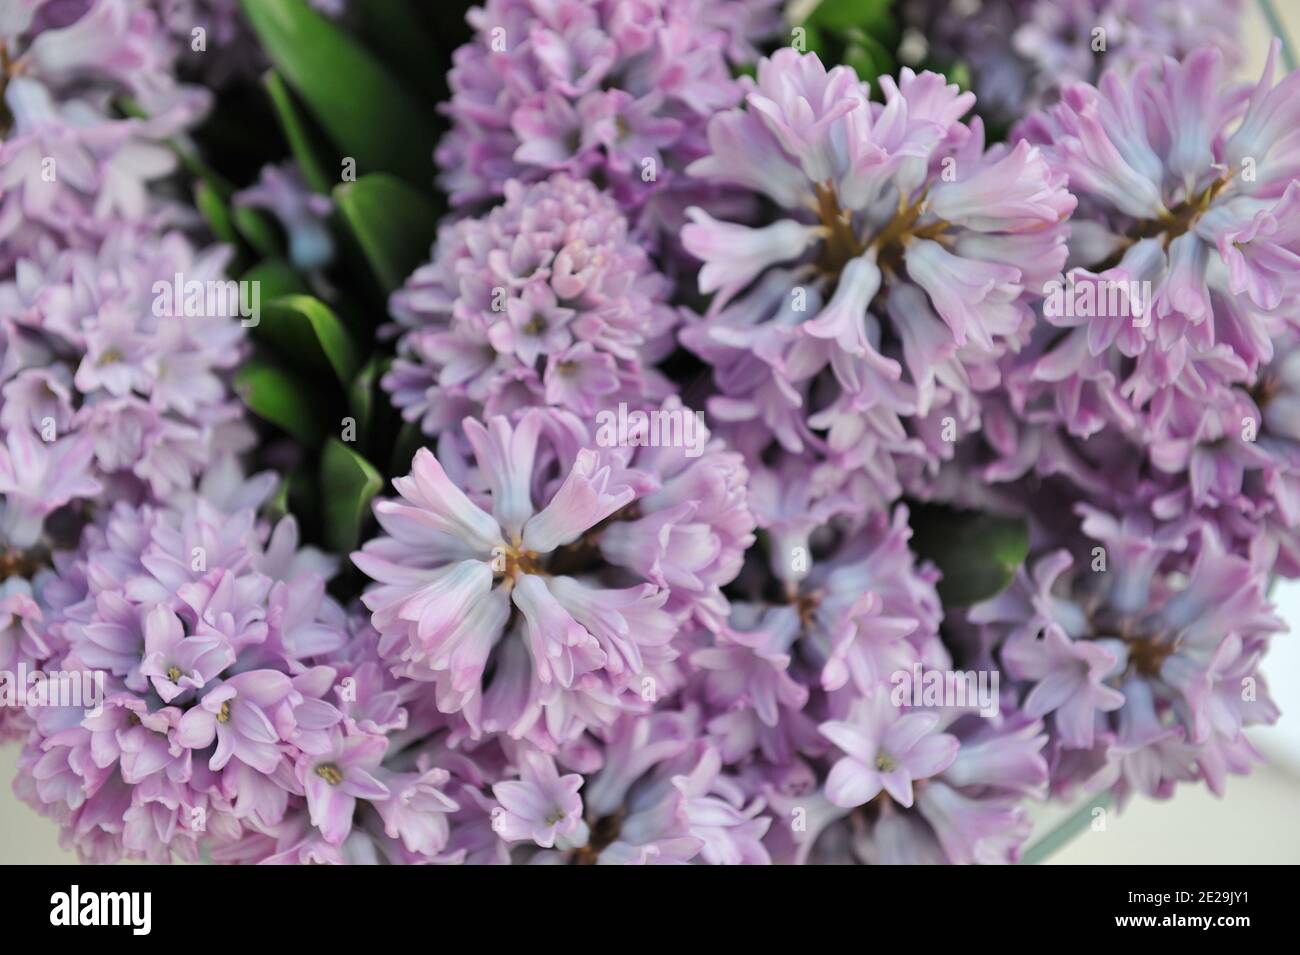 A bouquet of lilac-pink hyacinth (Hyacinthus orientalis) Tophit in a glass vase in April Stock Photo